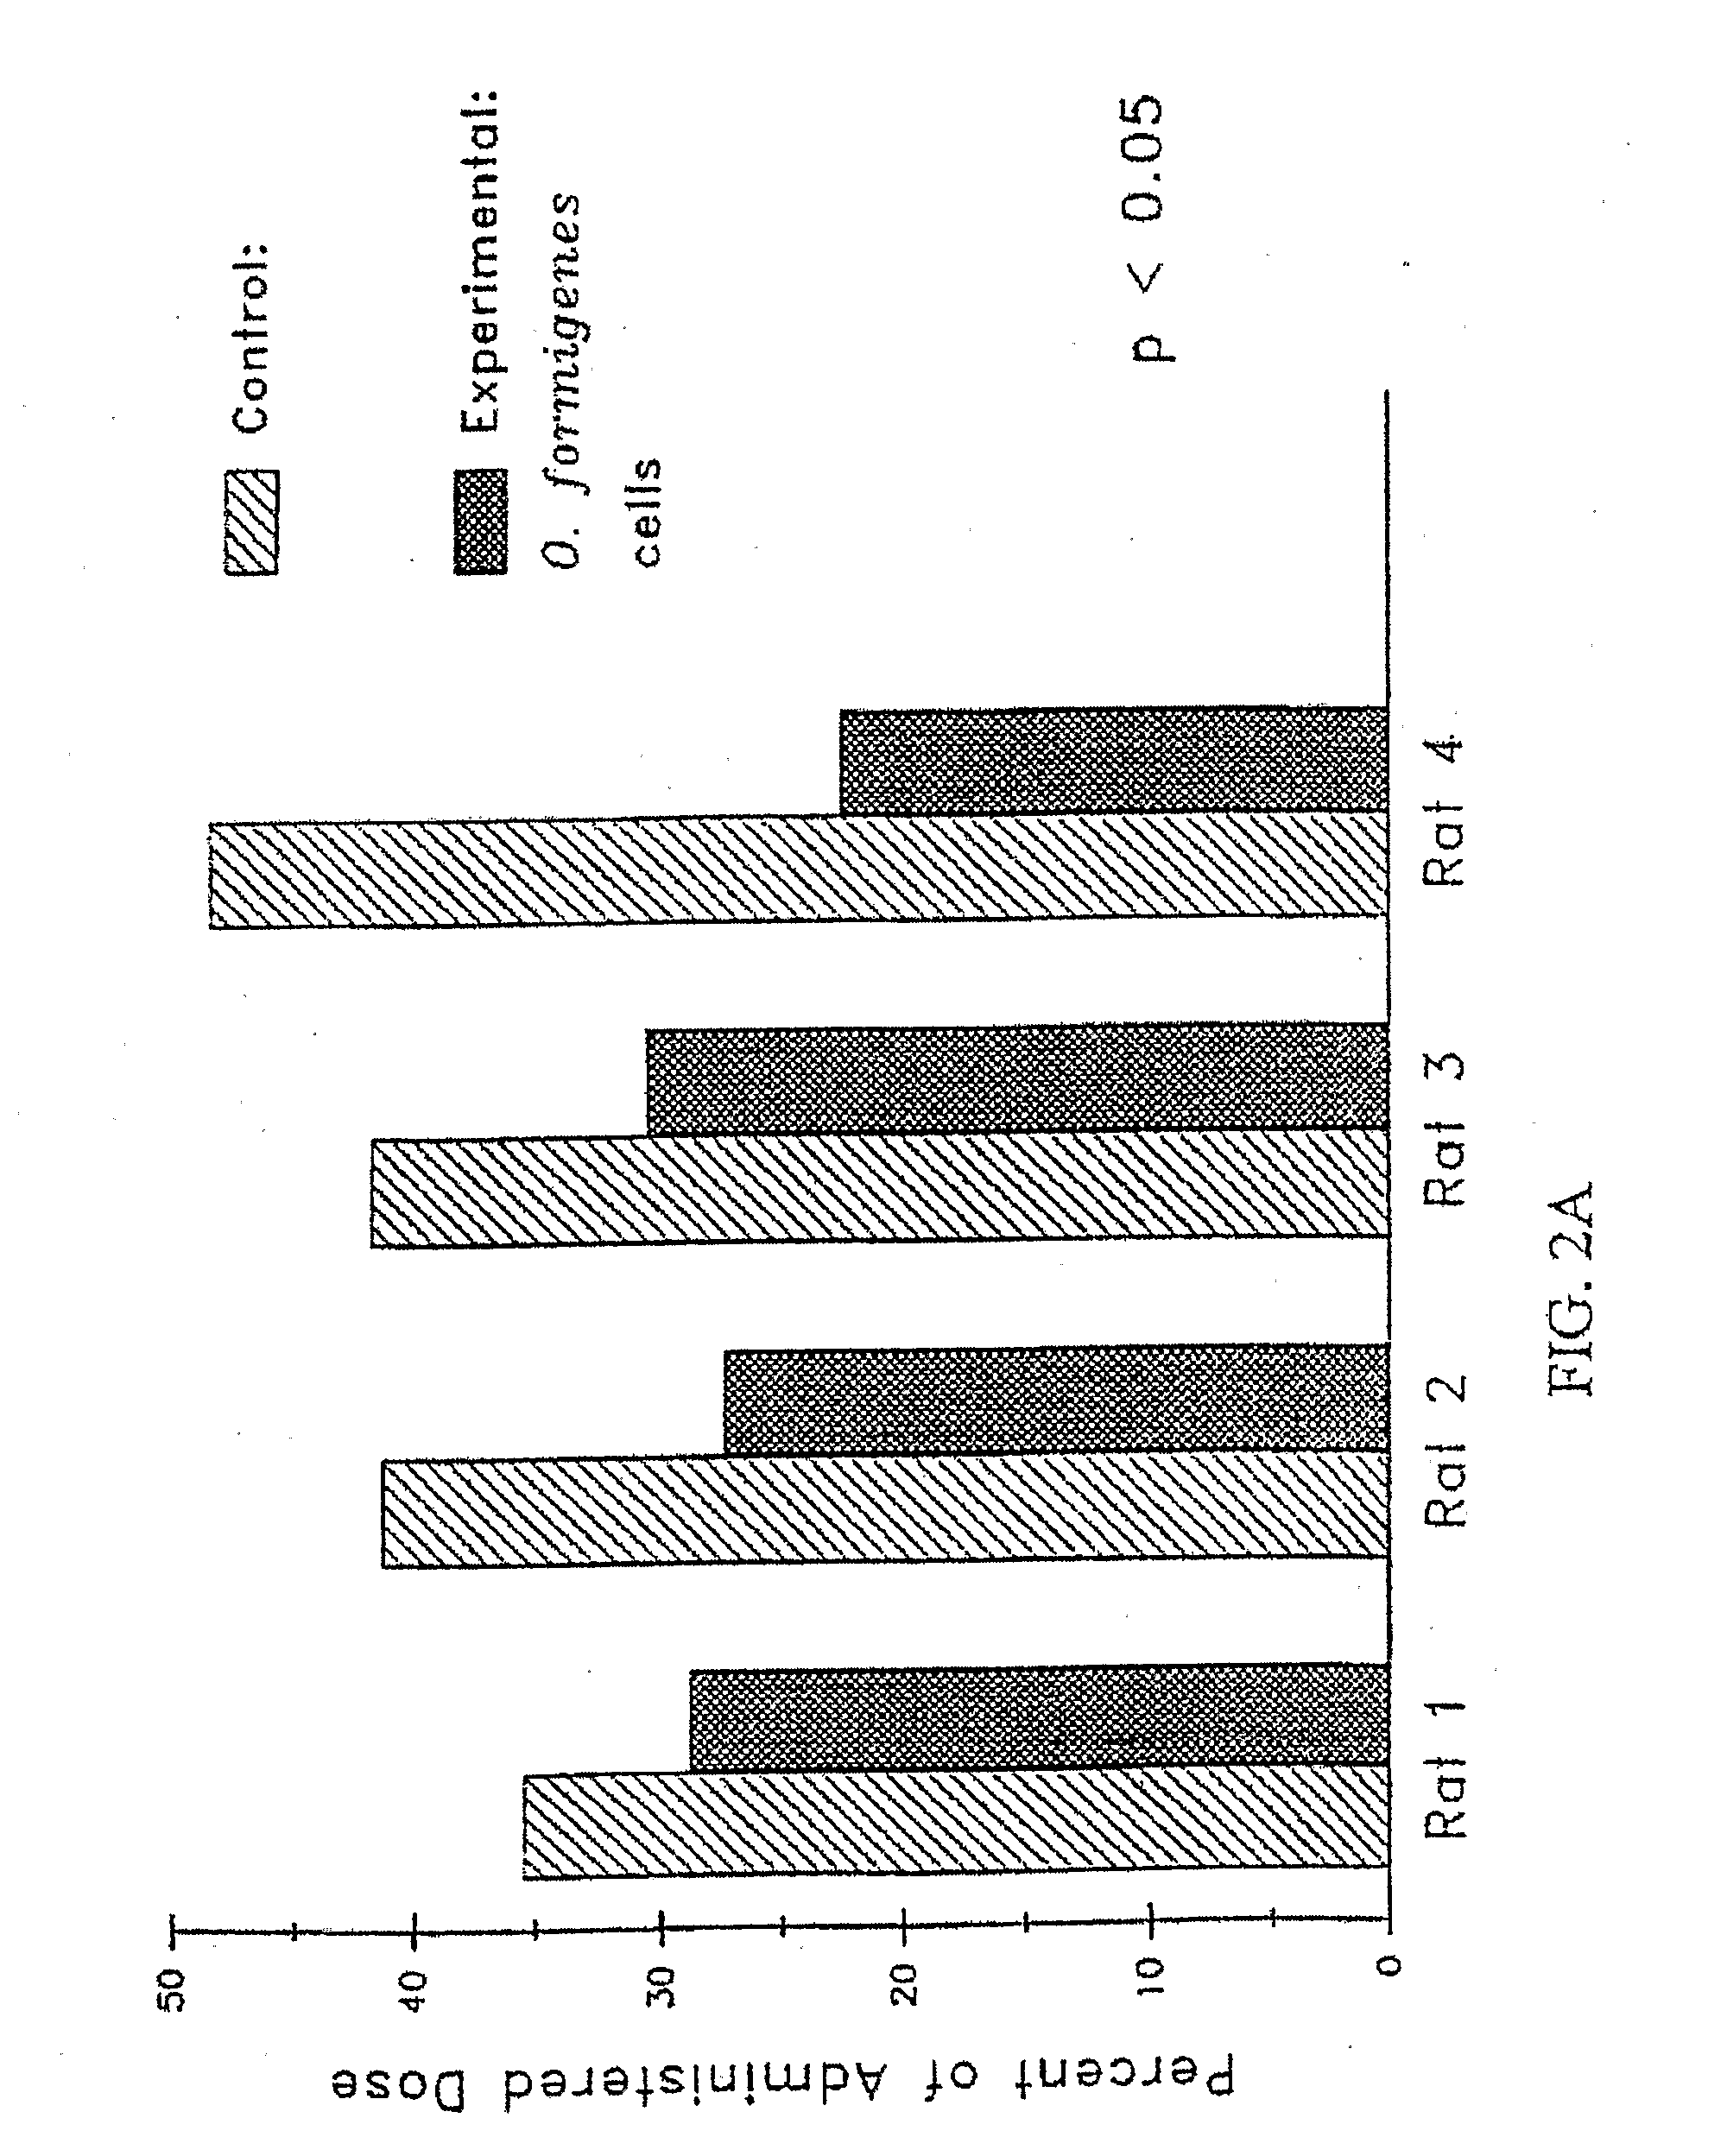 Pharmaceutical Compositions and Methods for Treating or Preventing Oxalate-Related Disease